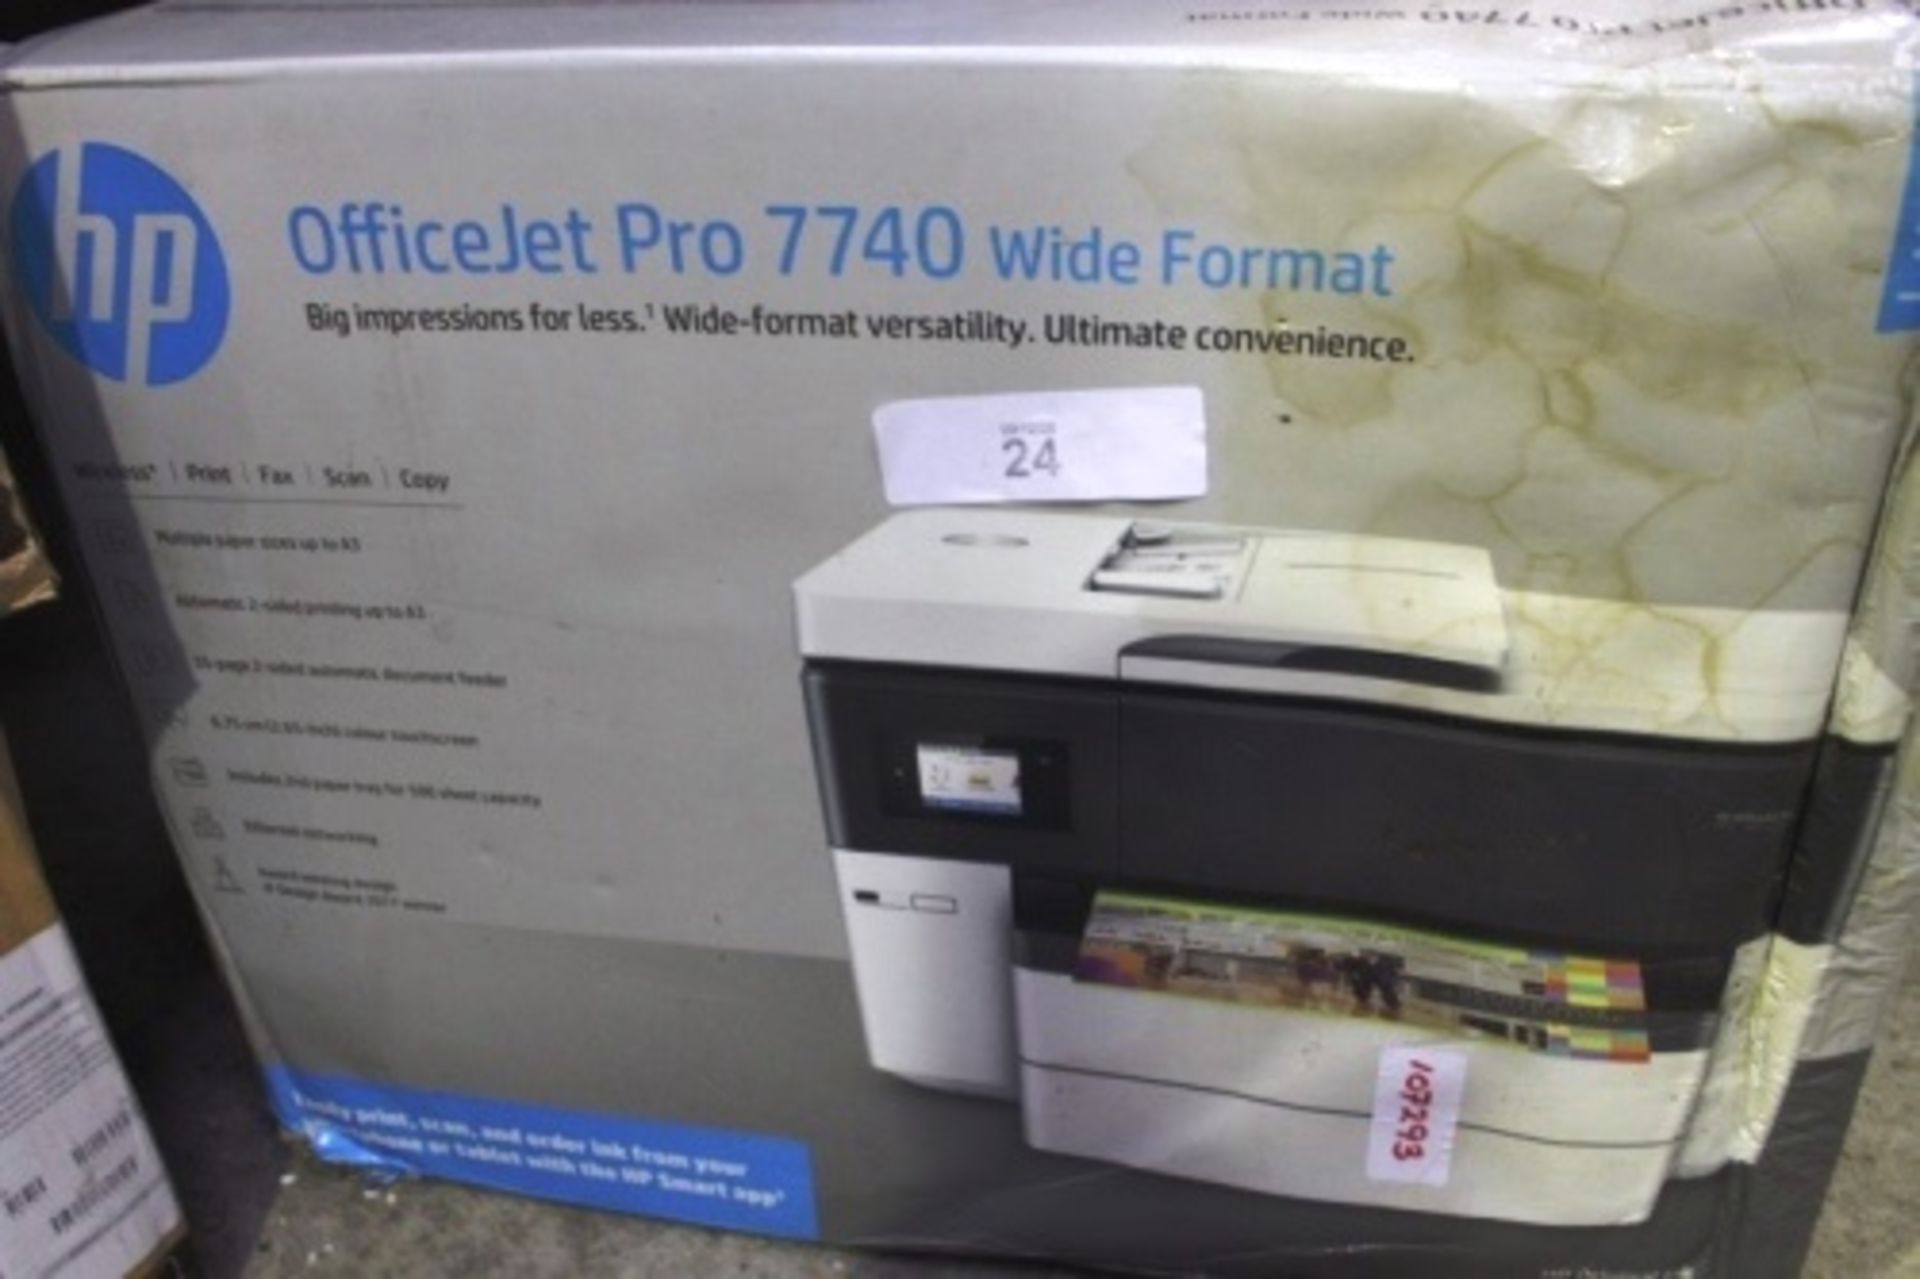 HP OfficeJet Pro 7740 wide format printer, model G5J38A Option A80 - Sealed new in box, box